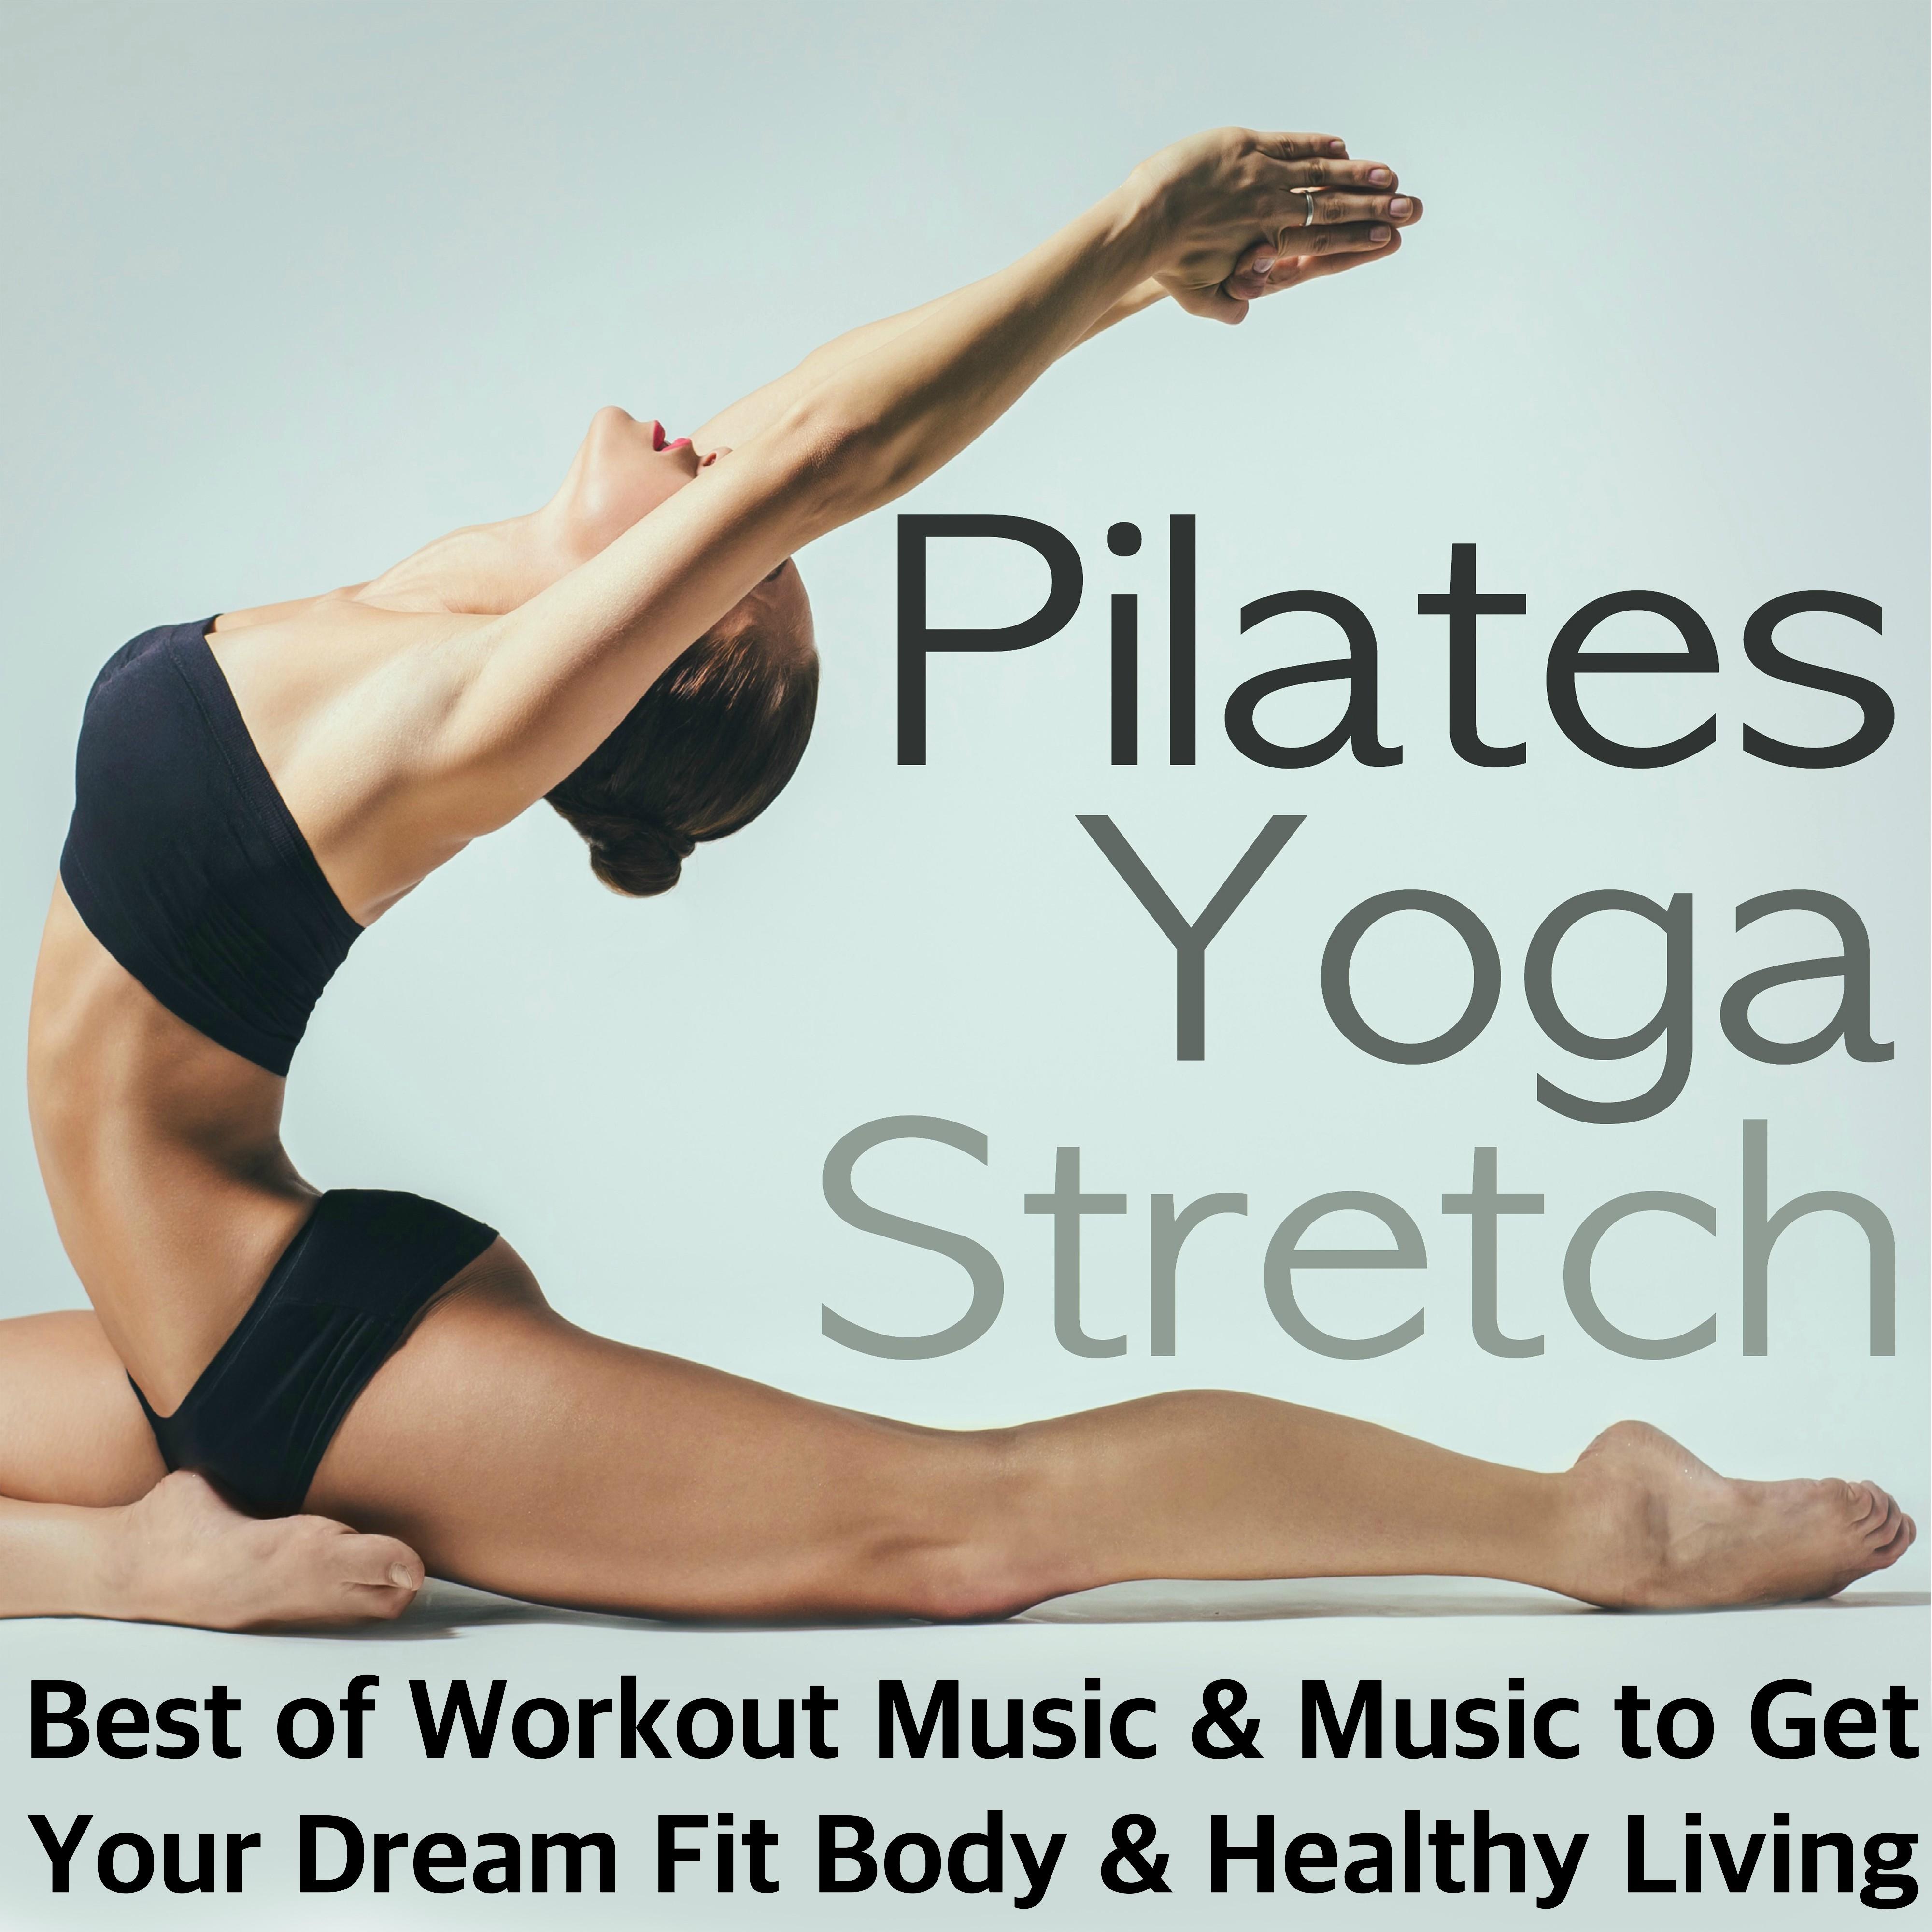 Pilates, Yoga & Stretch - Best of Workout Music, Relaxing Songs After Training & Meditation Background Music to Get Your Dream Fit Body & Healthy Living